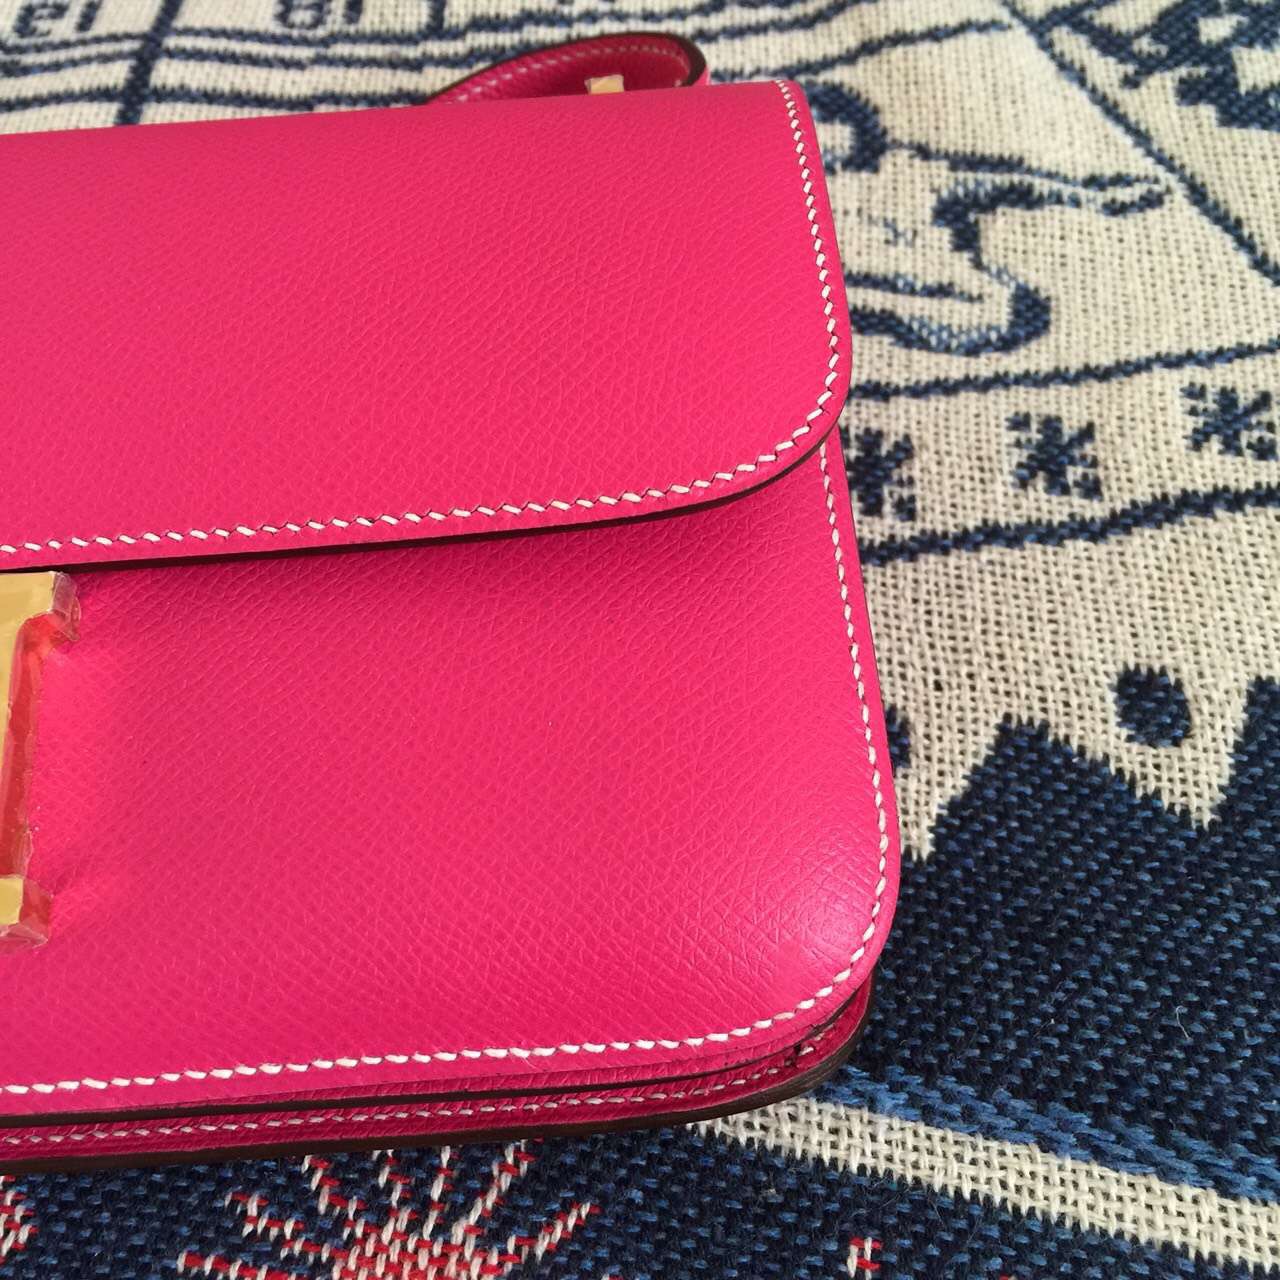 2015 New Fashion Hermes E5 Candy Pink Epsom Leather Constance Bag 26CM